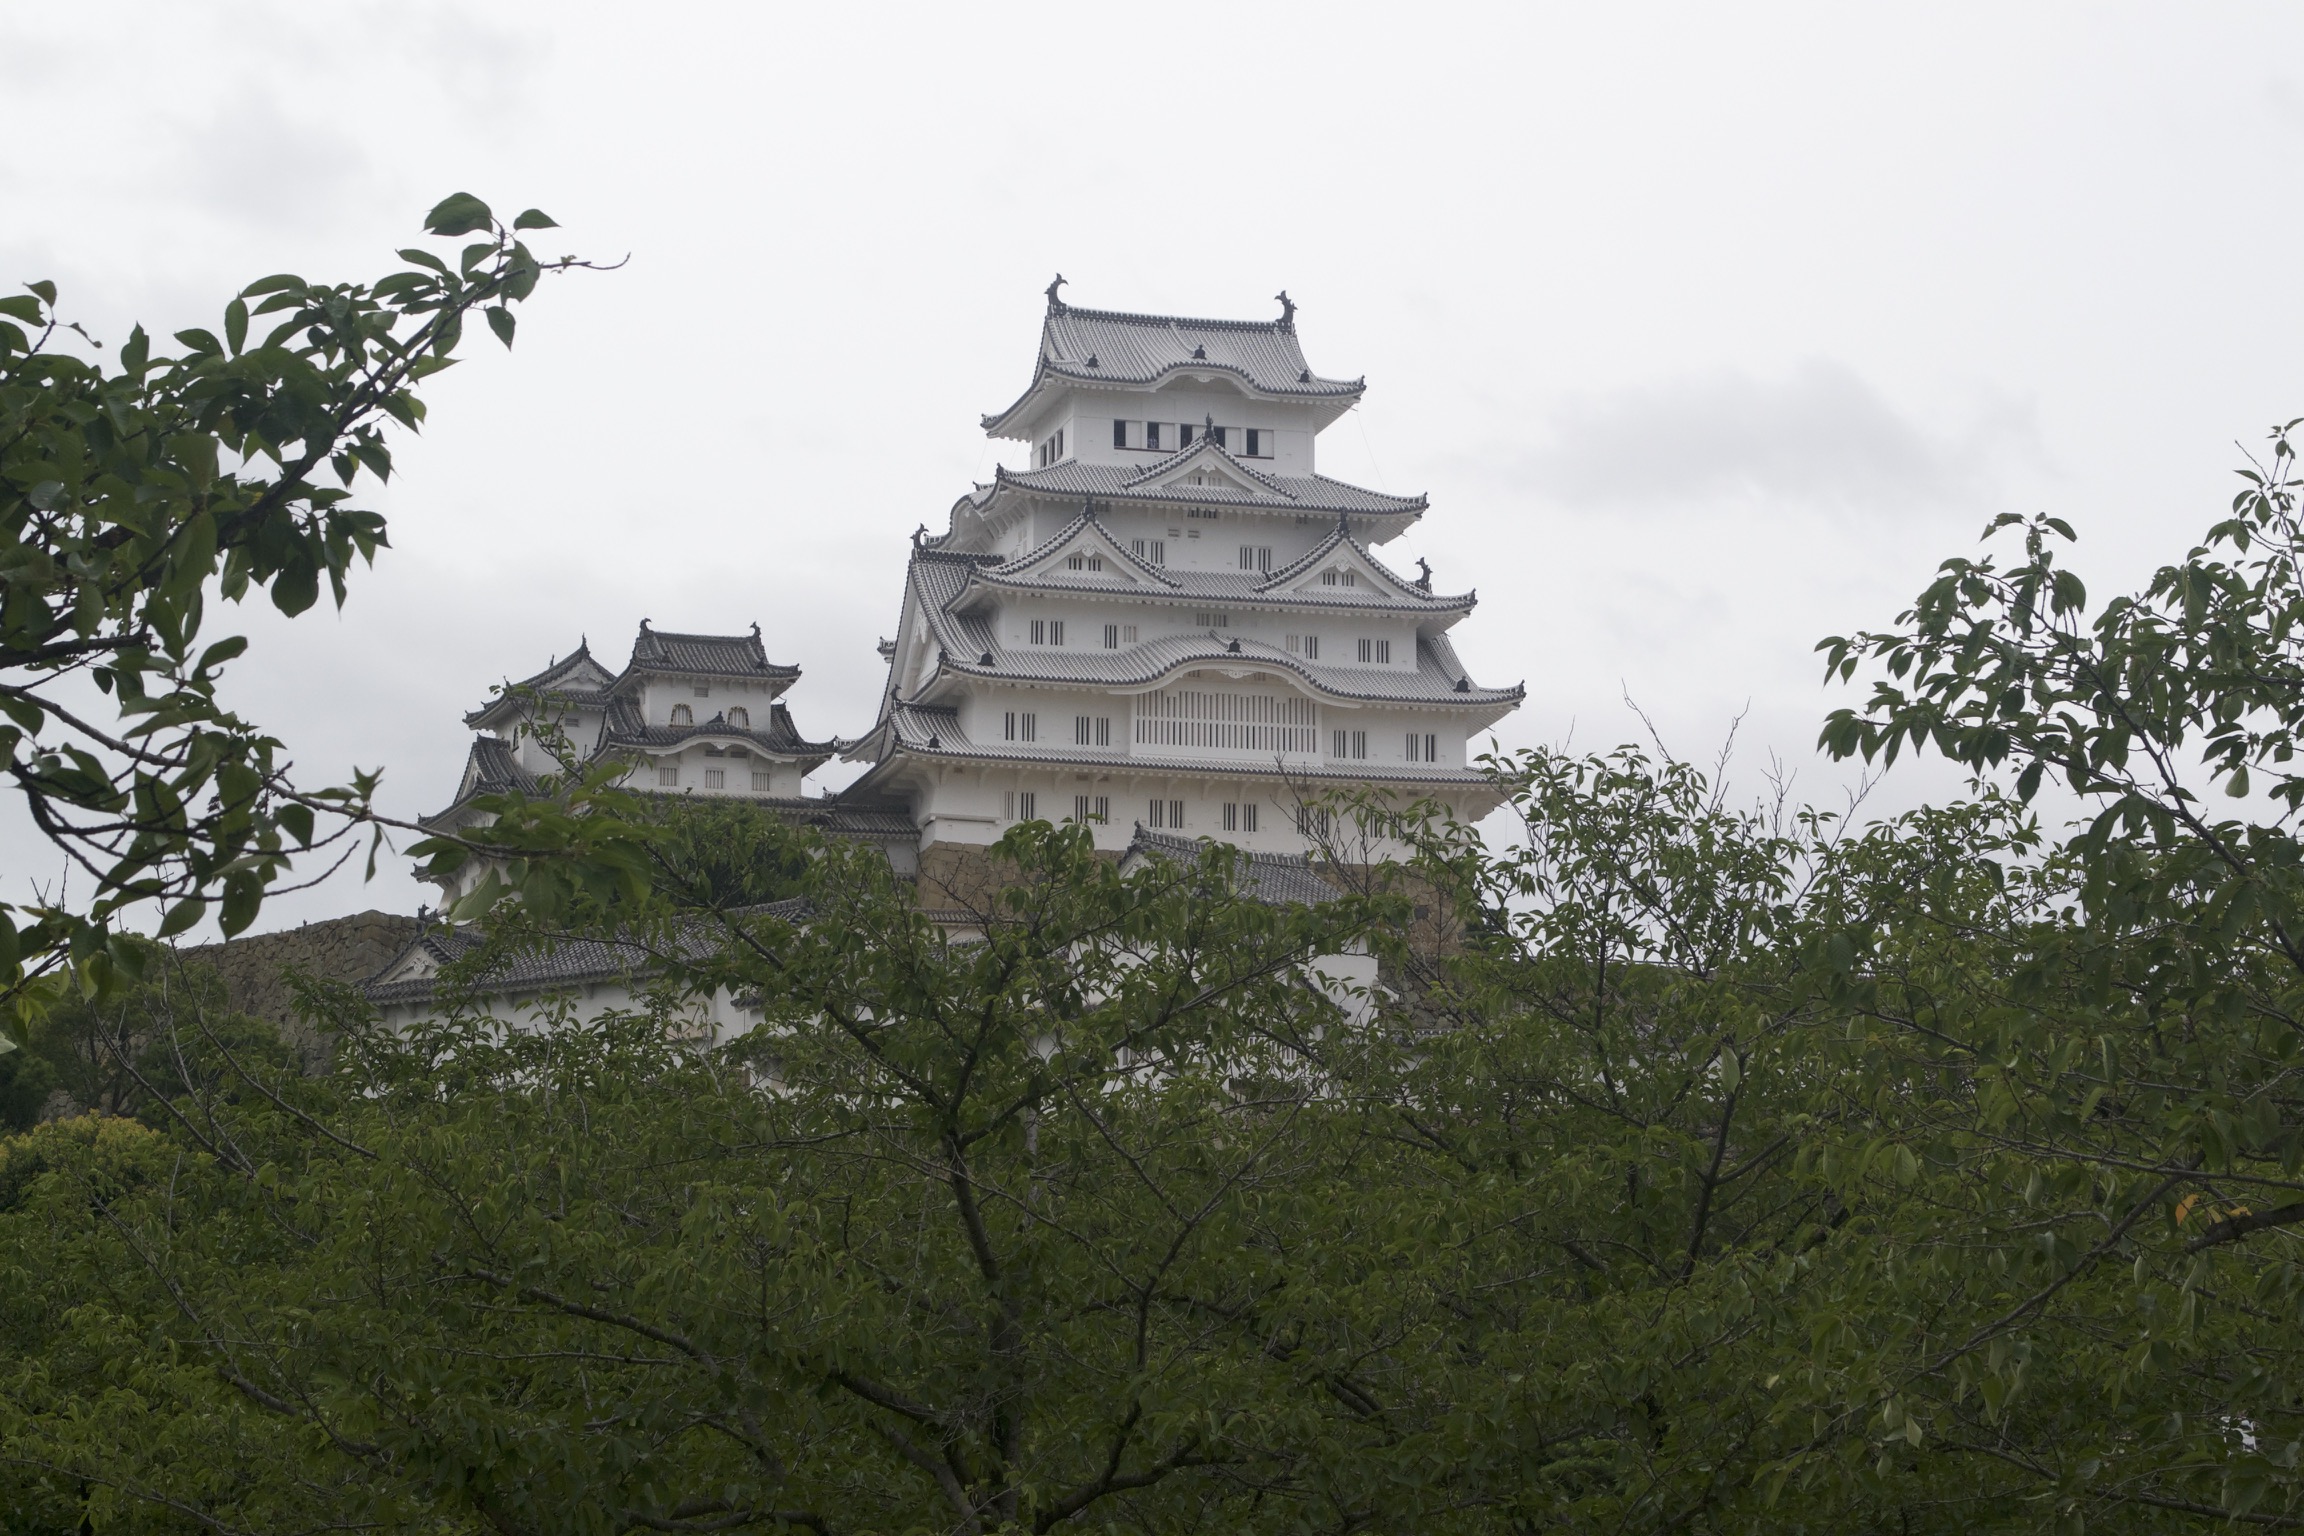 A black and white tiered castle stands against a gray sky.